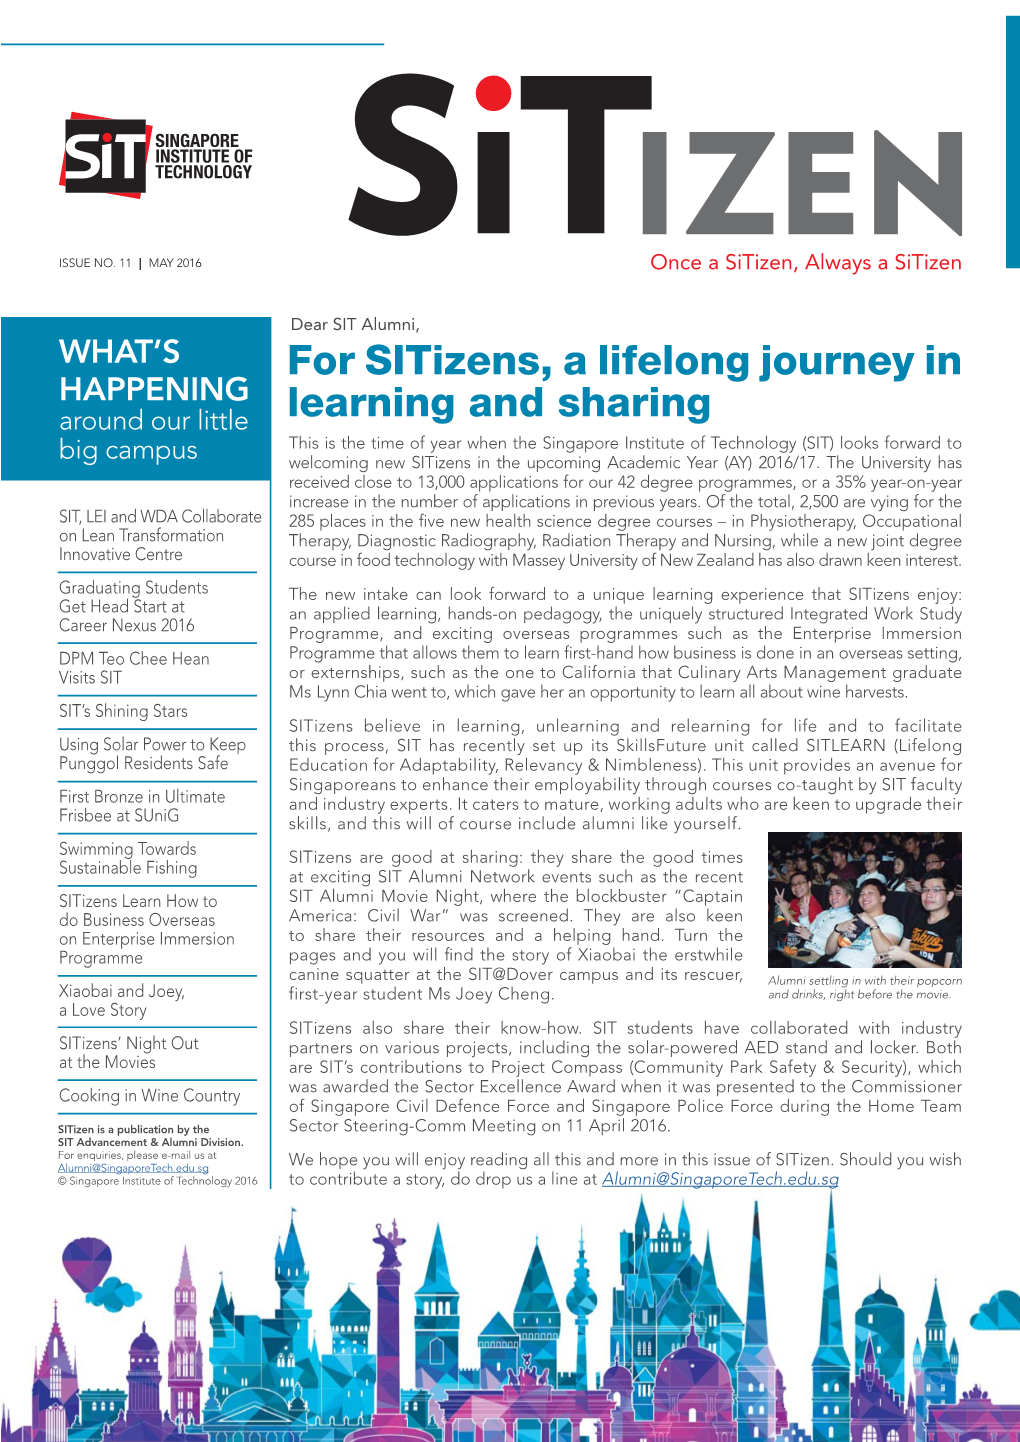 For Sitizens, a Lifelong Journey in Learning and Sharing